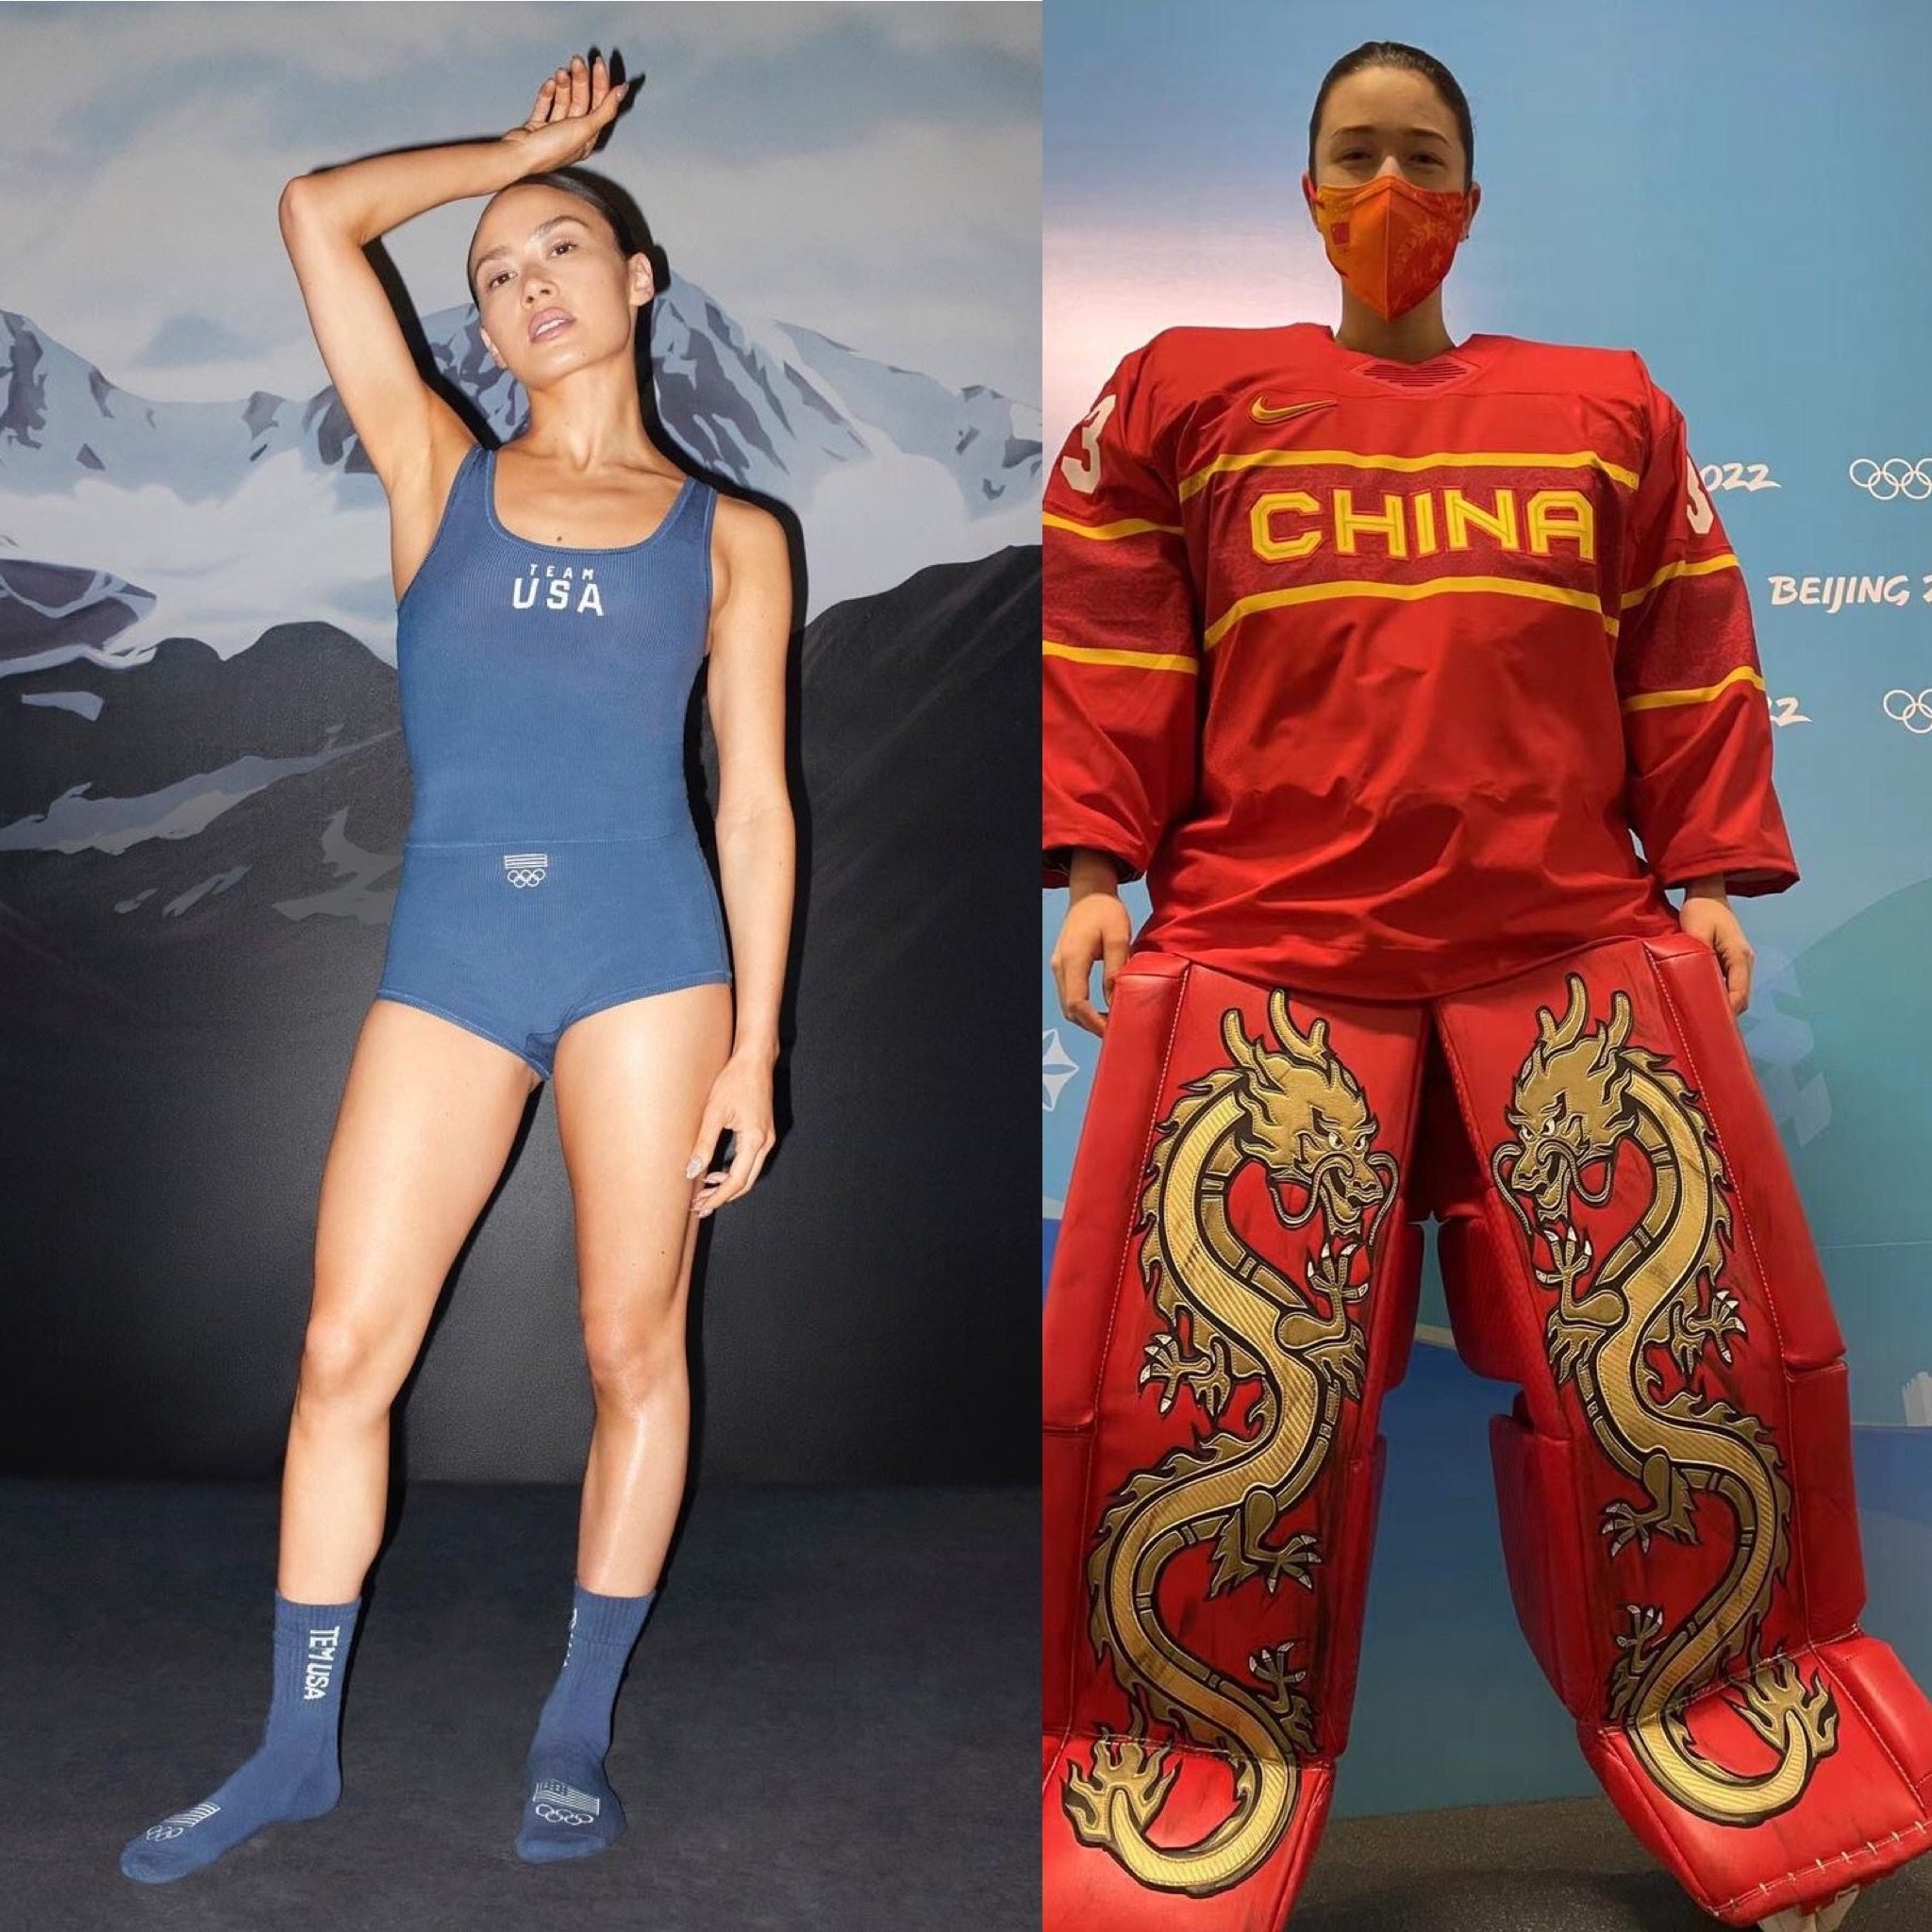 Official Team USA Clothing, Gear - Beijing 2022 Winter Olympics